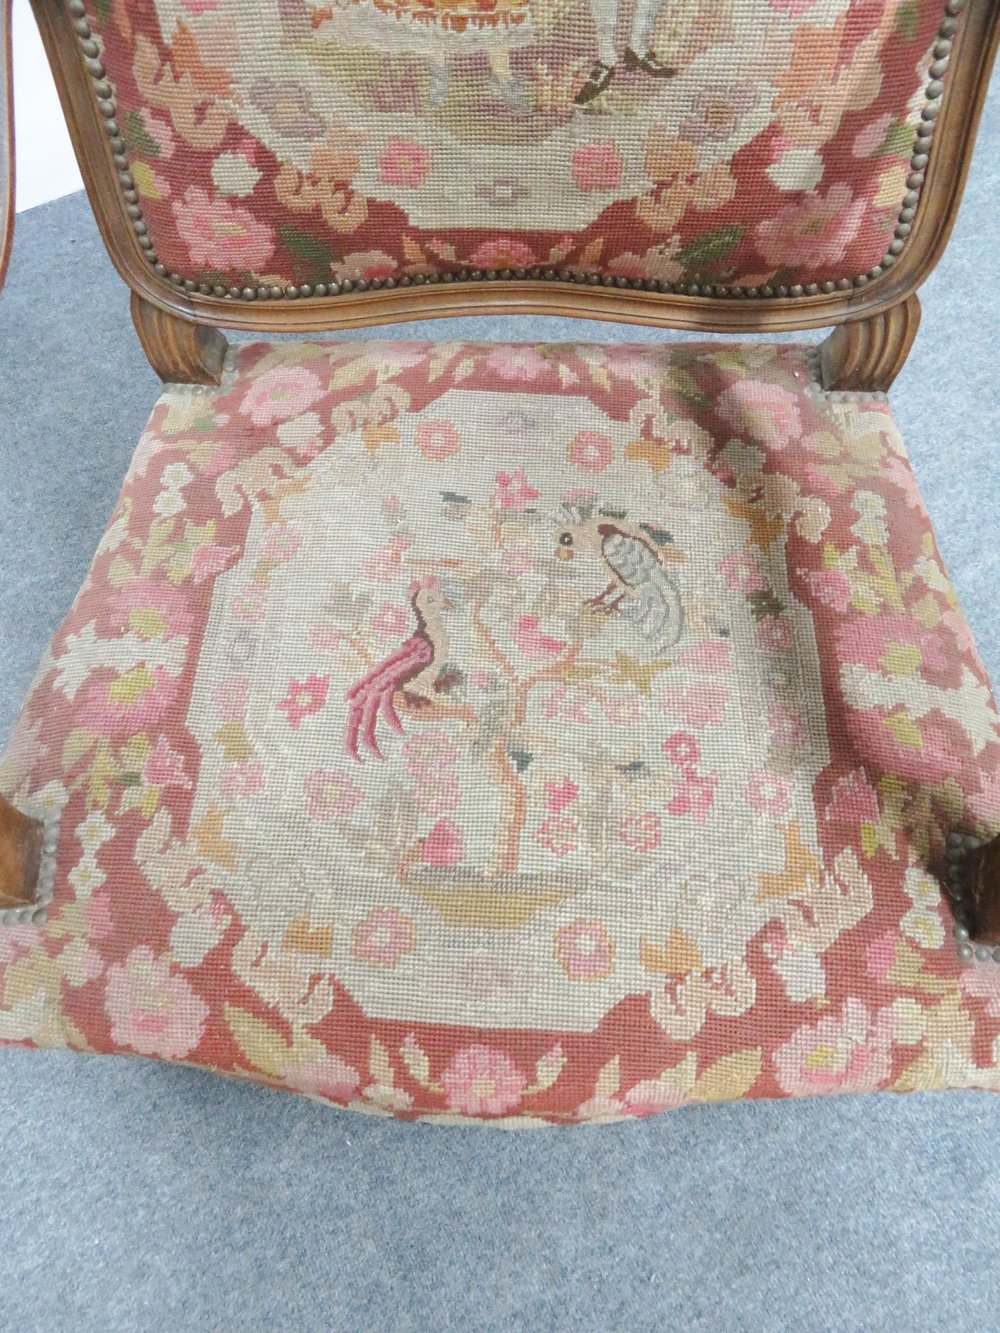 Louis XV French Aubusson Chair — Sonty Johns' Antiques